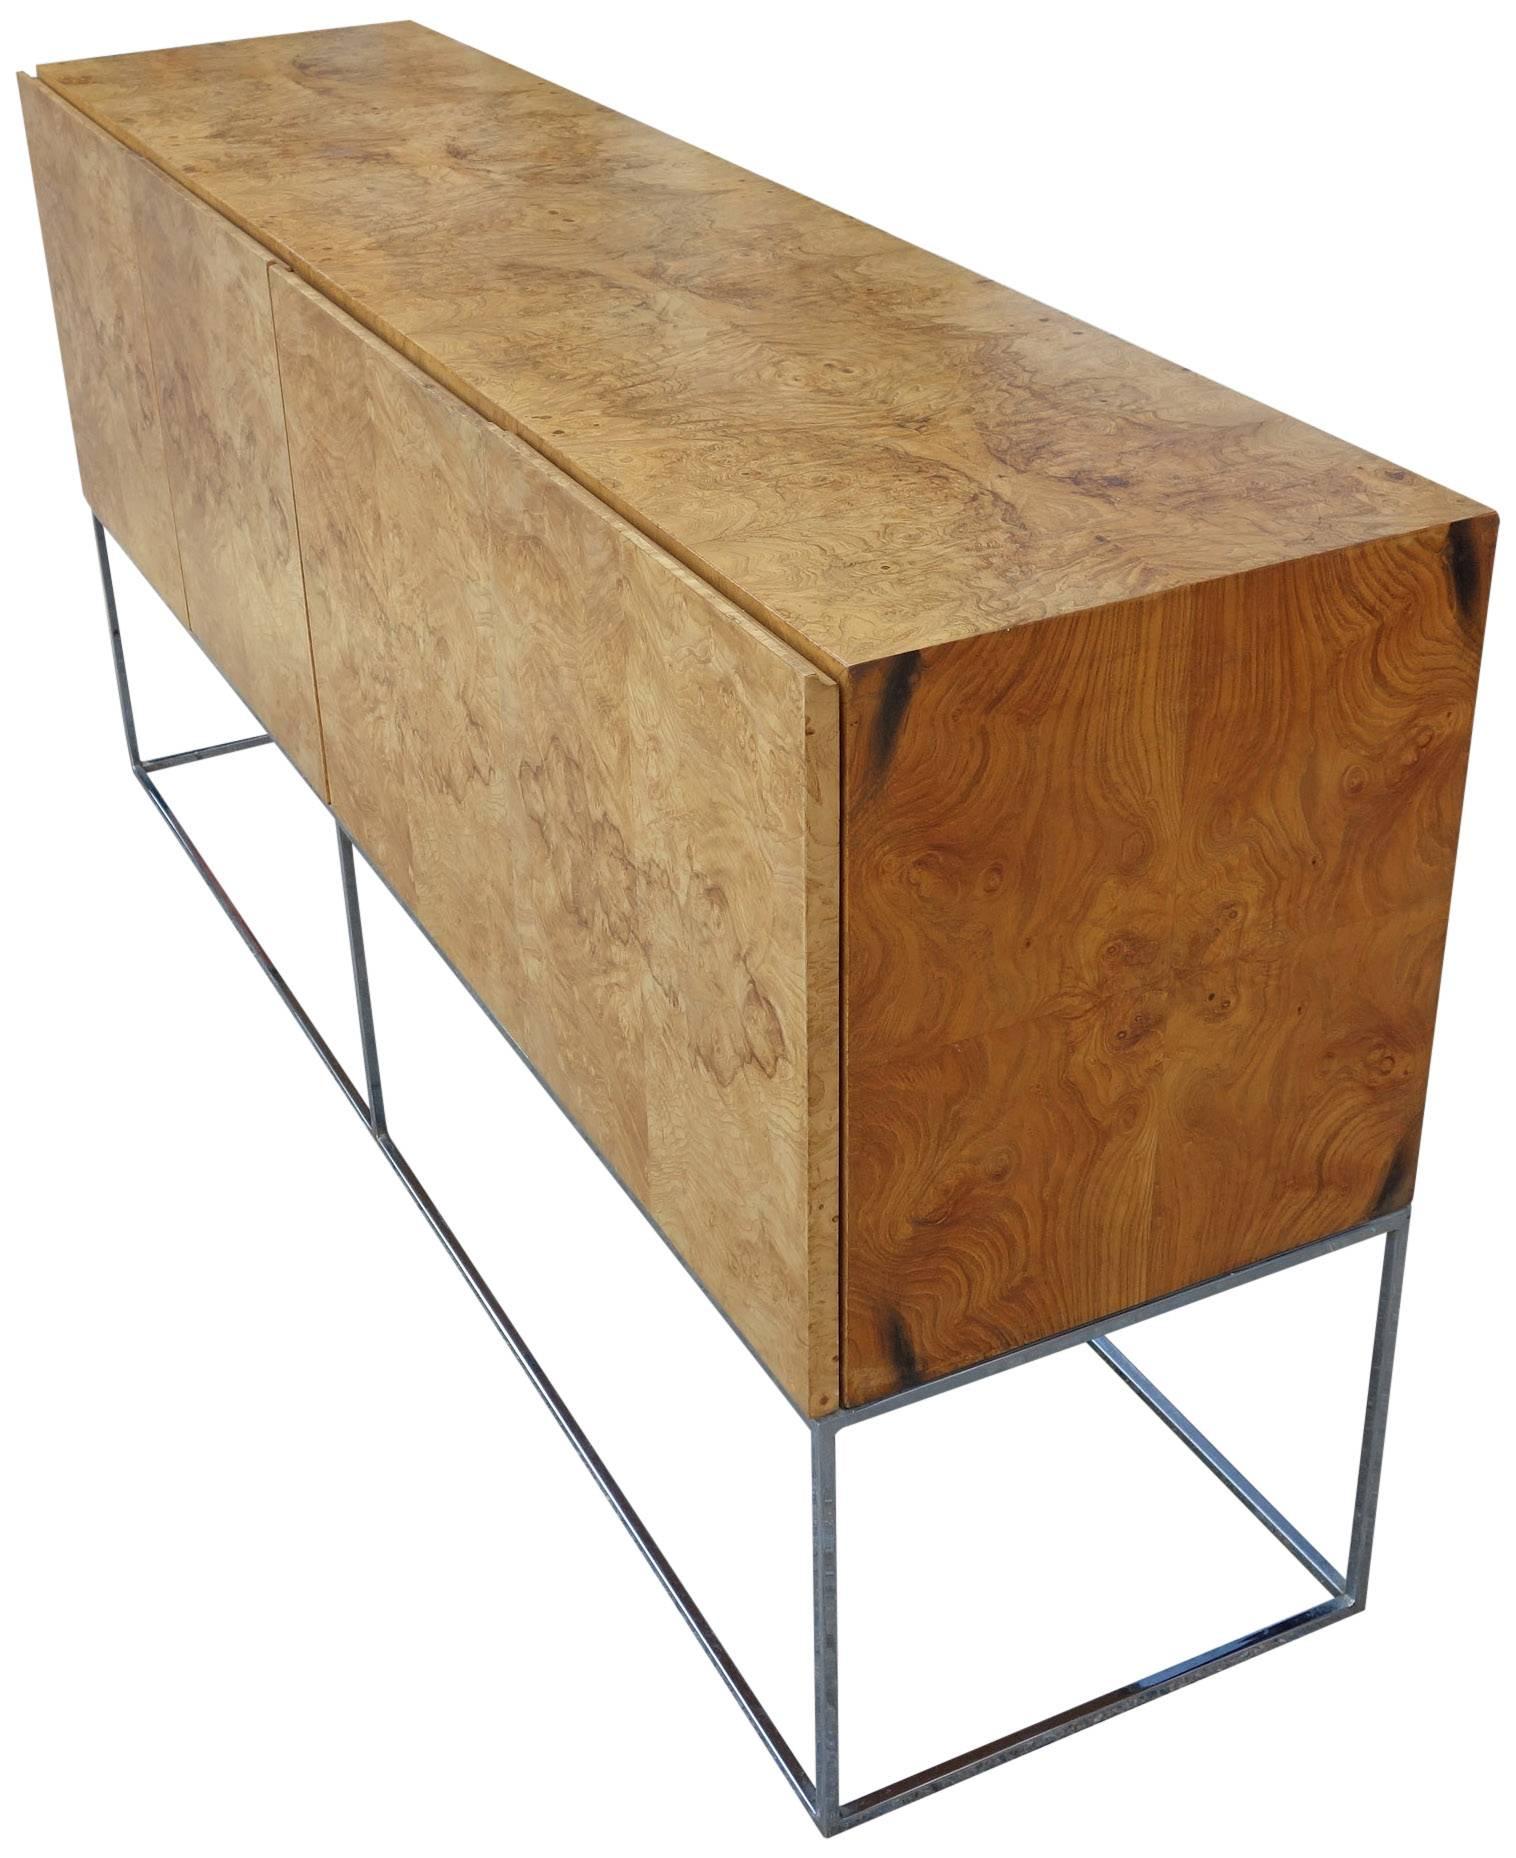 Late 20th Century Milo Baughman for Thayer Coggin Burl Wood Credenza on a Floating Chrome Base